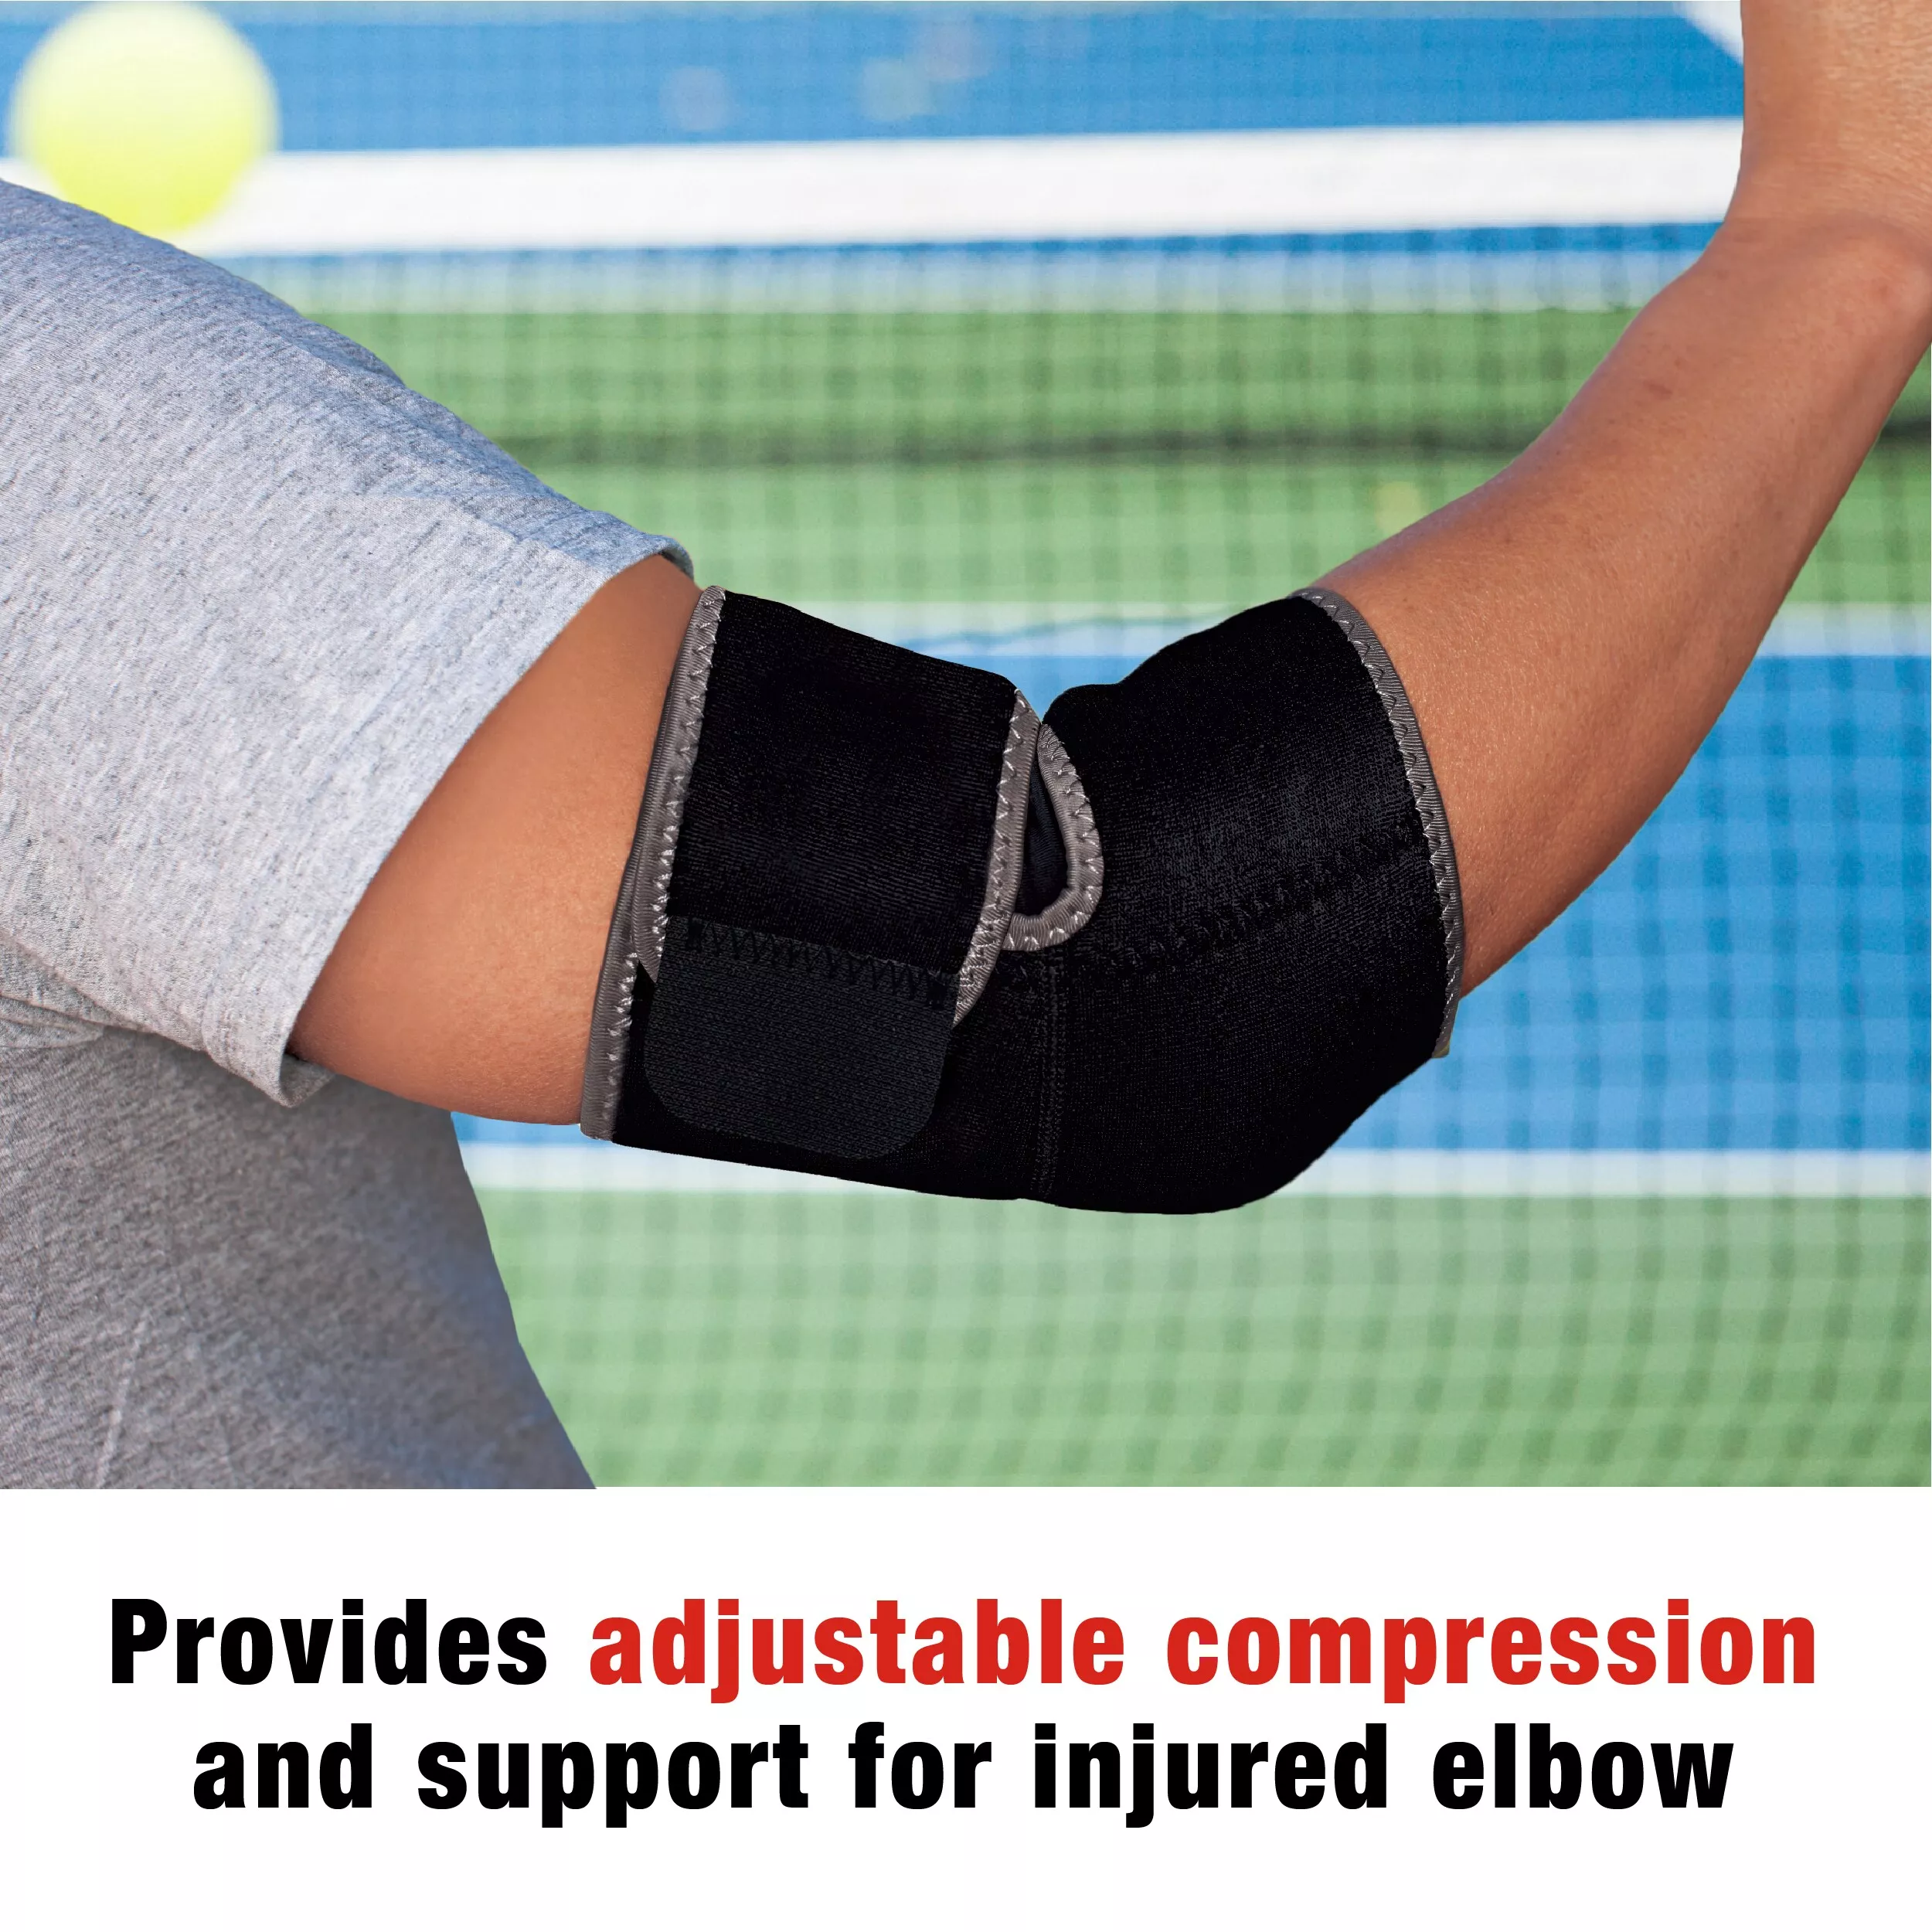 SKU 7100189583 | ACE™ Elbow Support 904004